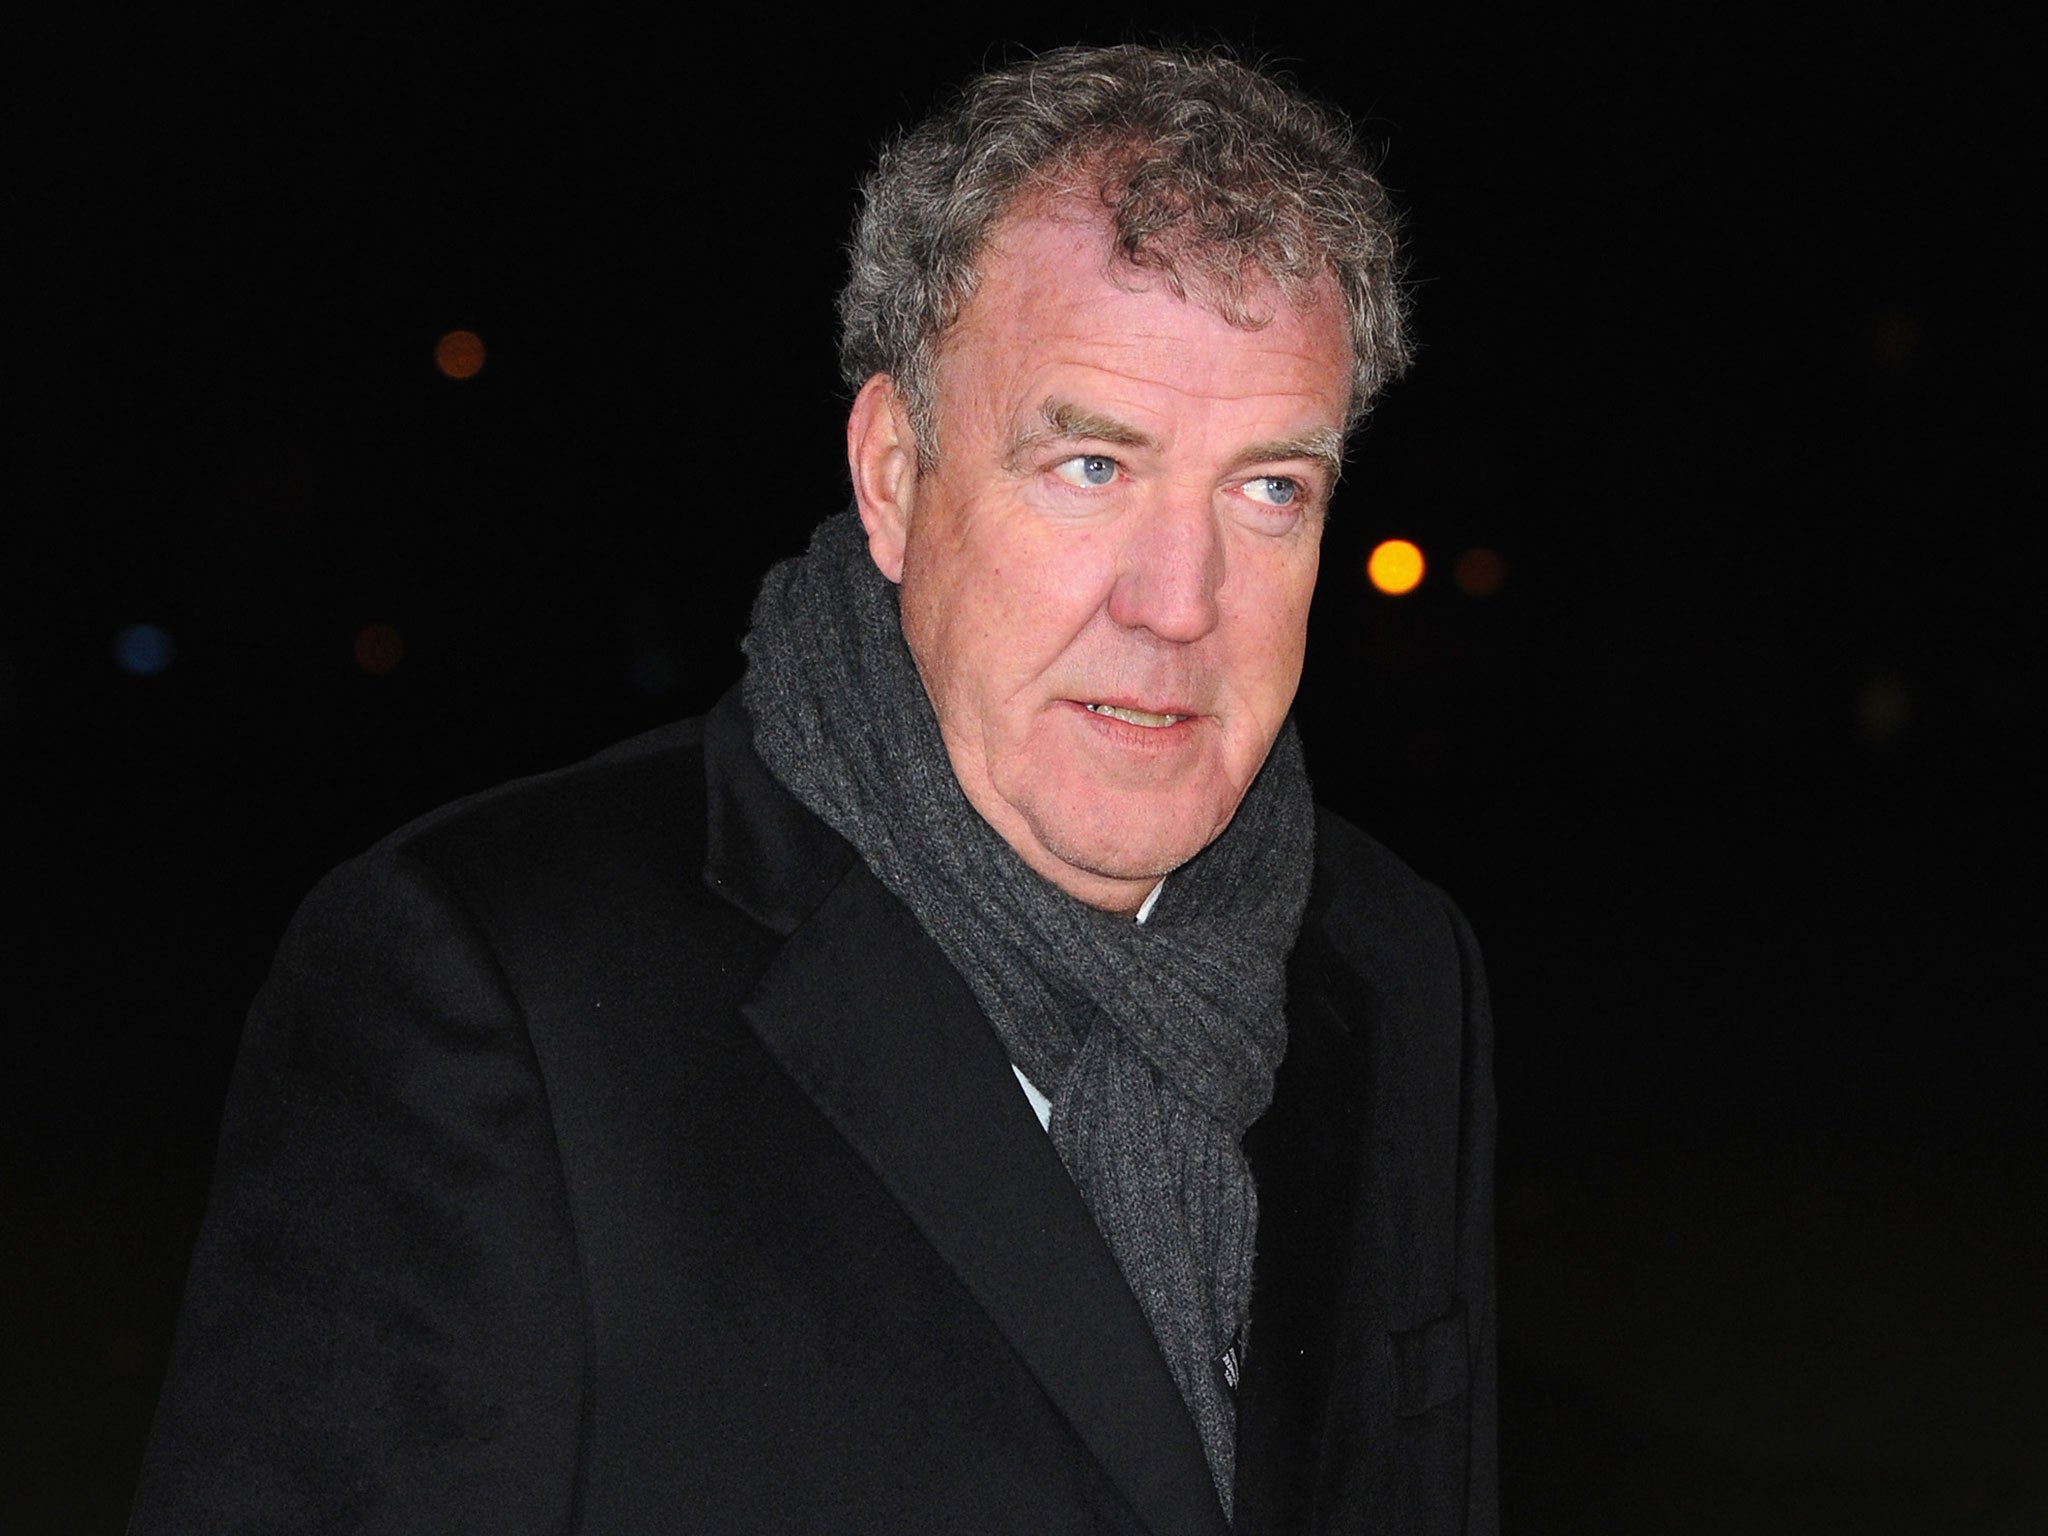 Clarkson is said to be “intensely relaxed” about the inquiry into his “fracas”